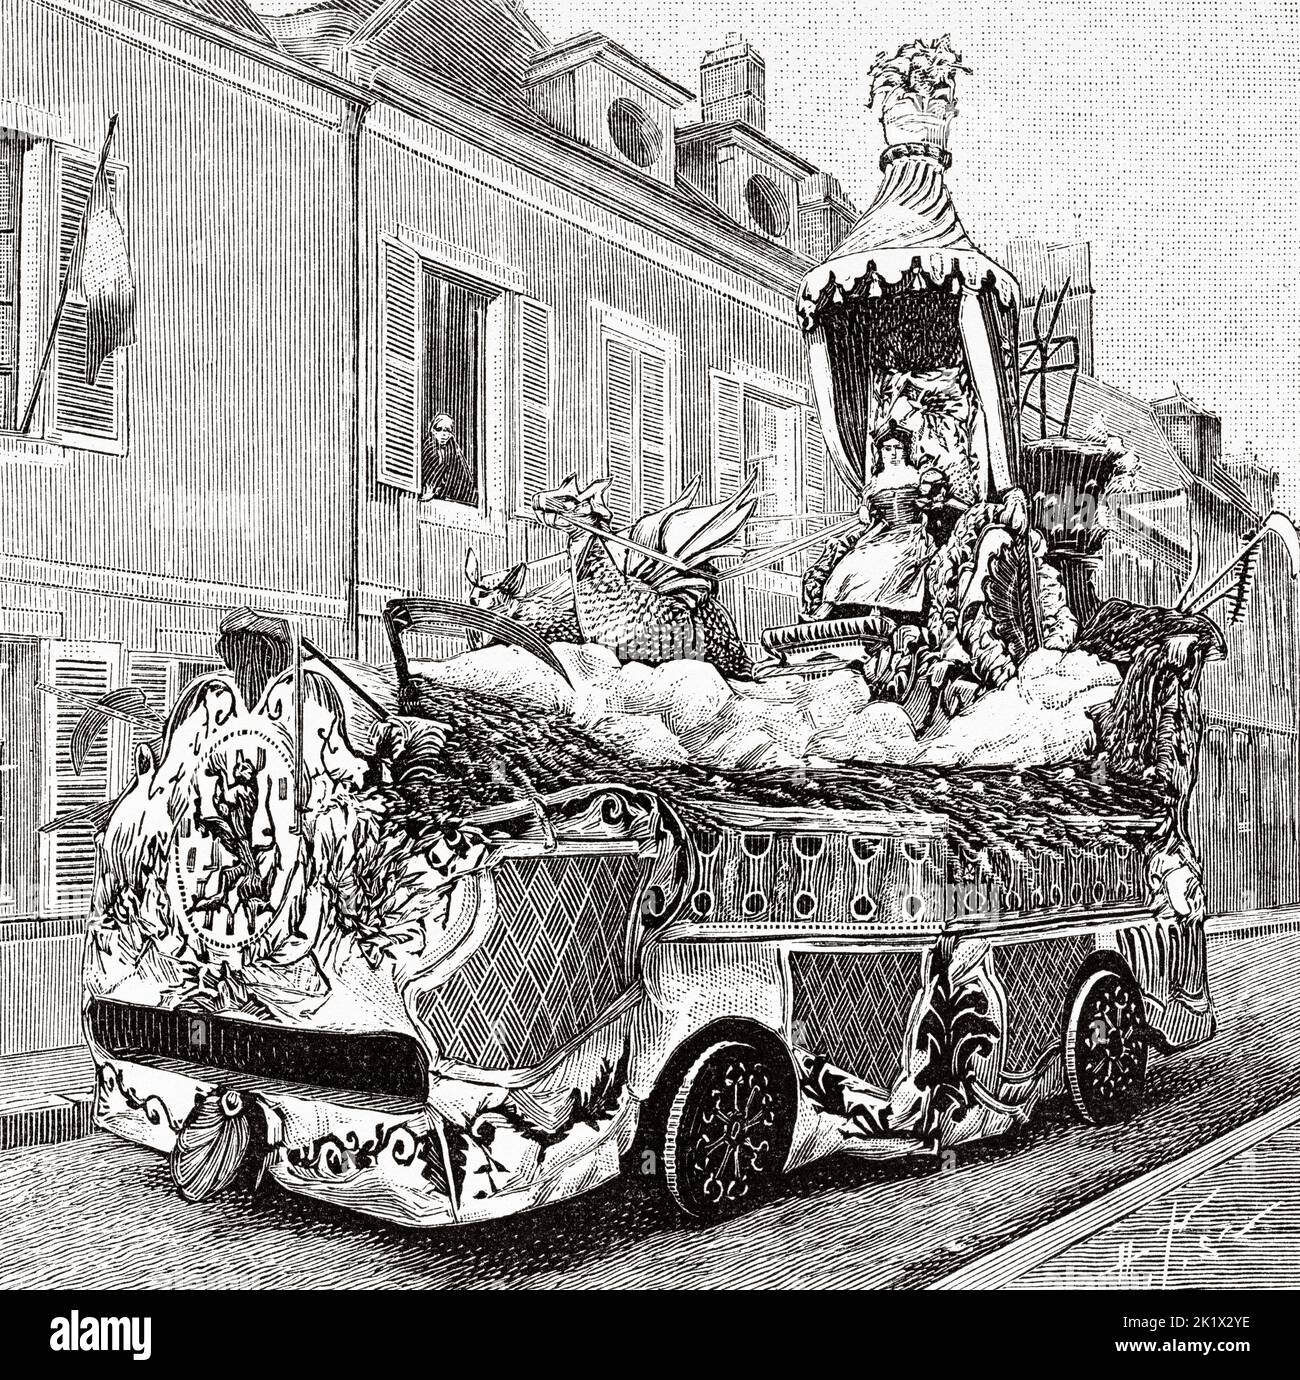 Chariot, procession of the 'Illuminated Festival', of Auxerre tradition on the way to the The Universal Exhibition in Paris 1889, France. Old 19th century engraved illustration from La Nature 1890 Stock Photo